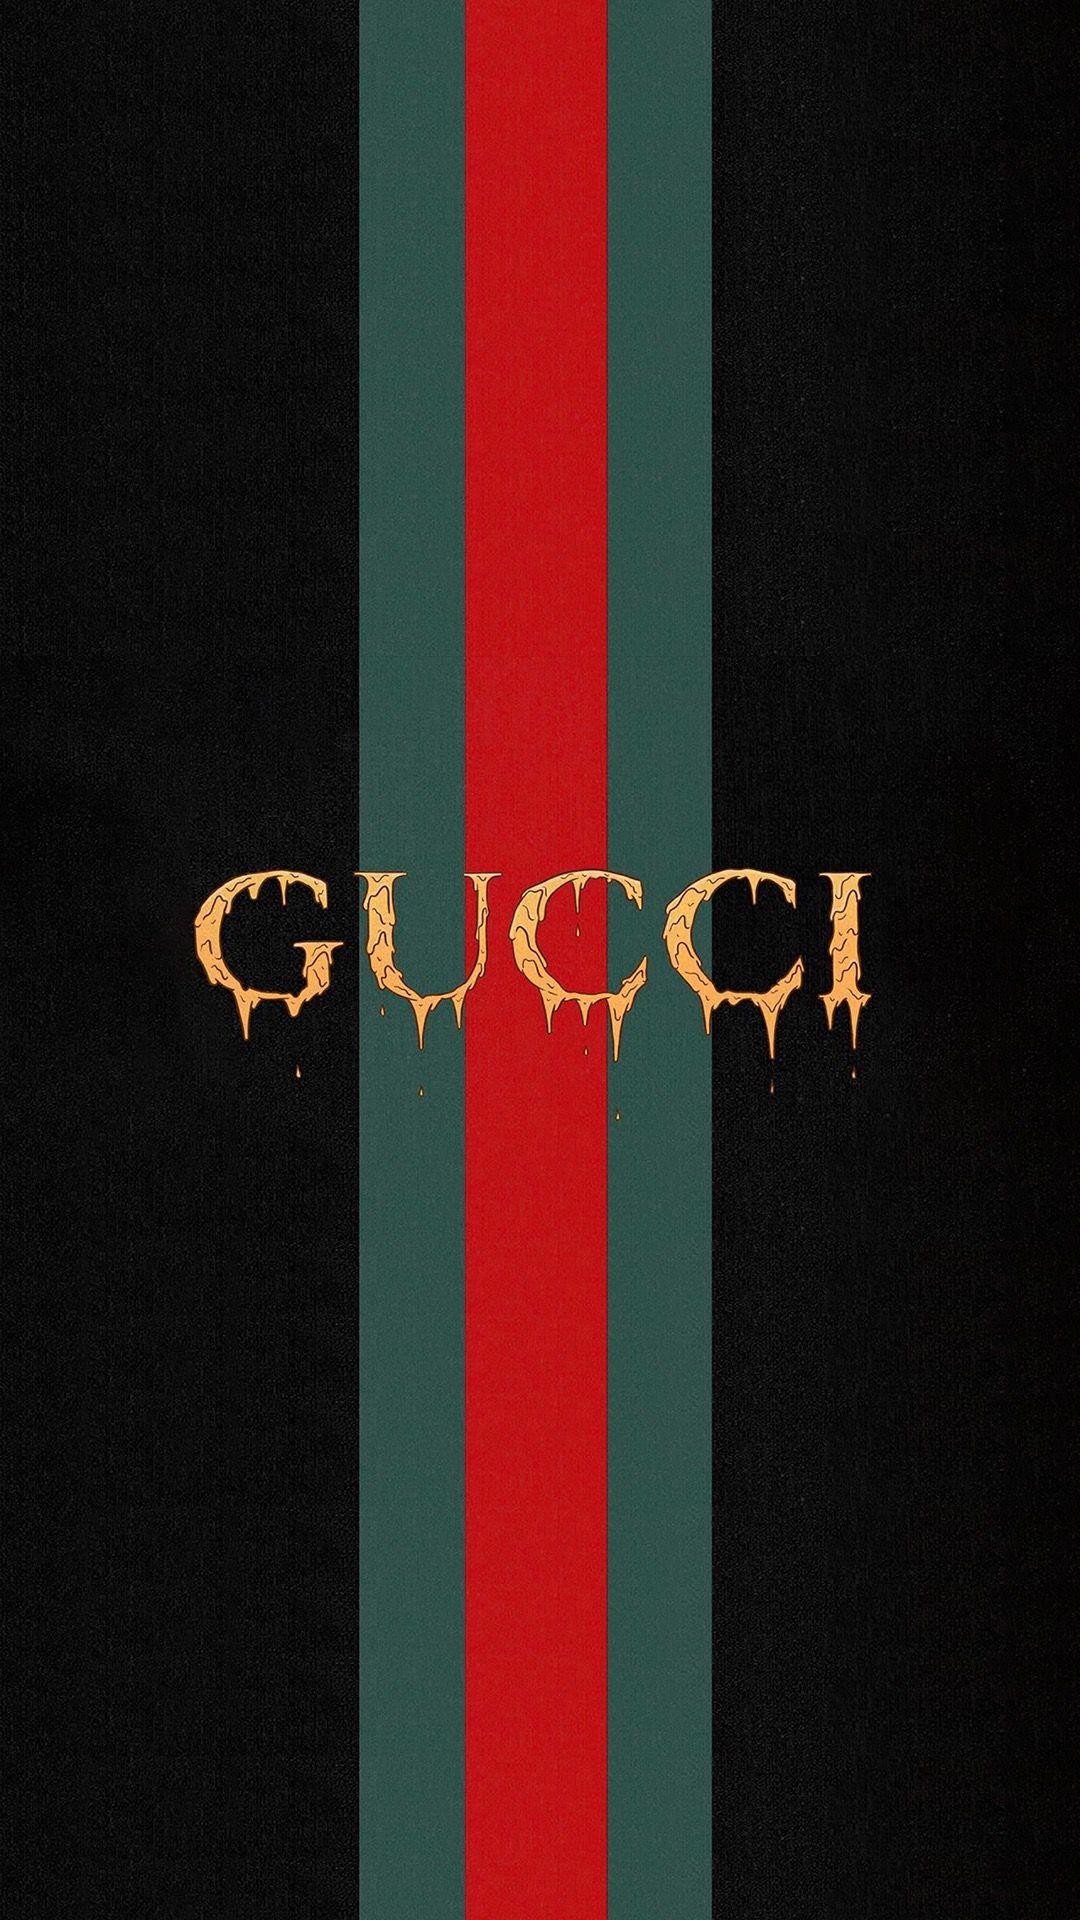 750x1334 Supreme And Gucci Wallpapers - Wallpaper Cave  Supreme wallpaper, Gucci  wallpaper iphone, Supreme iphone wallpaper